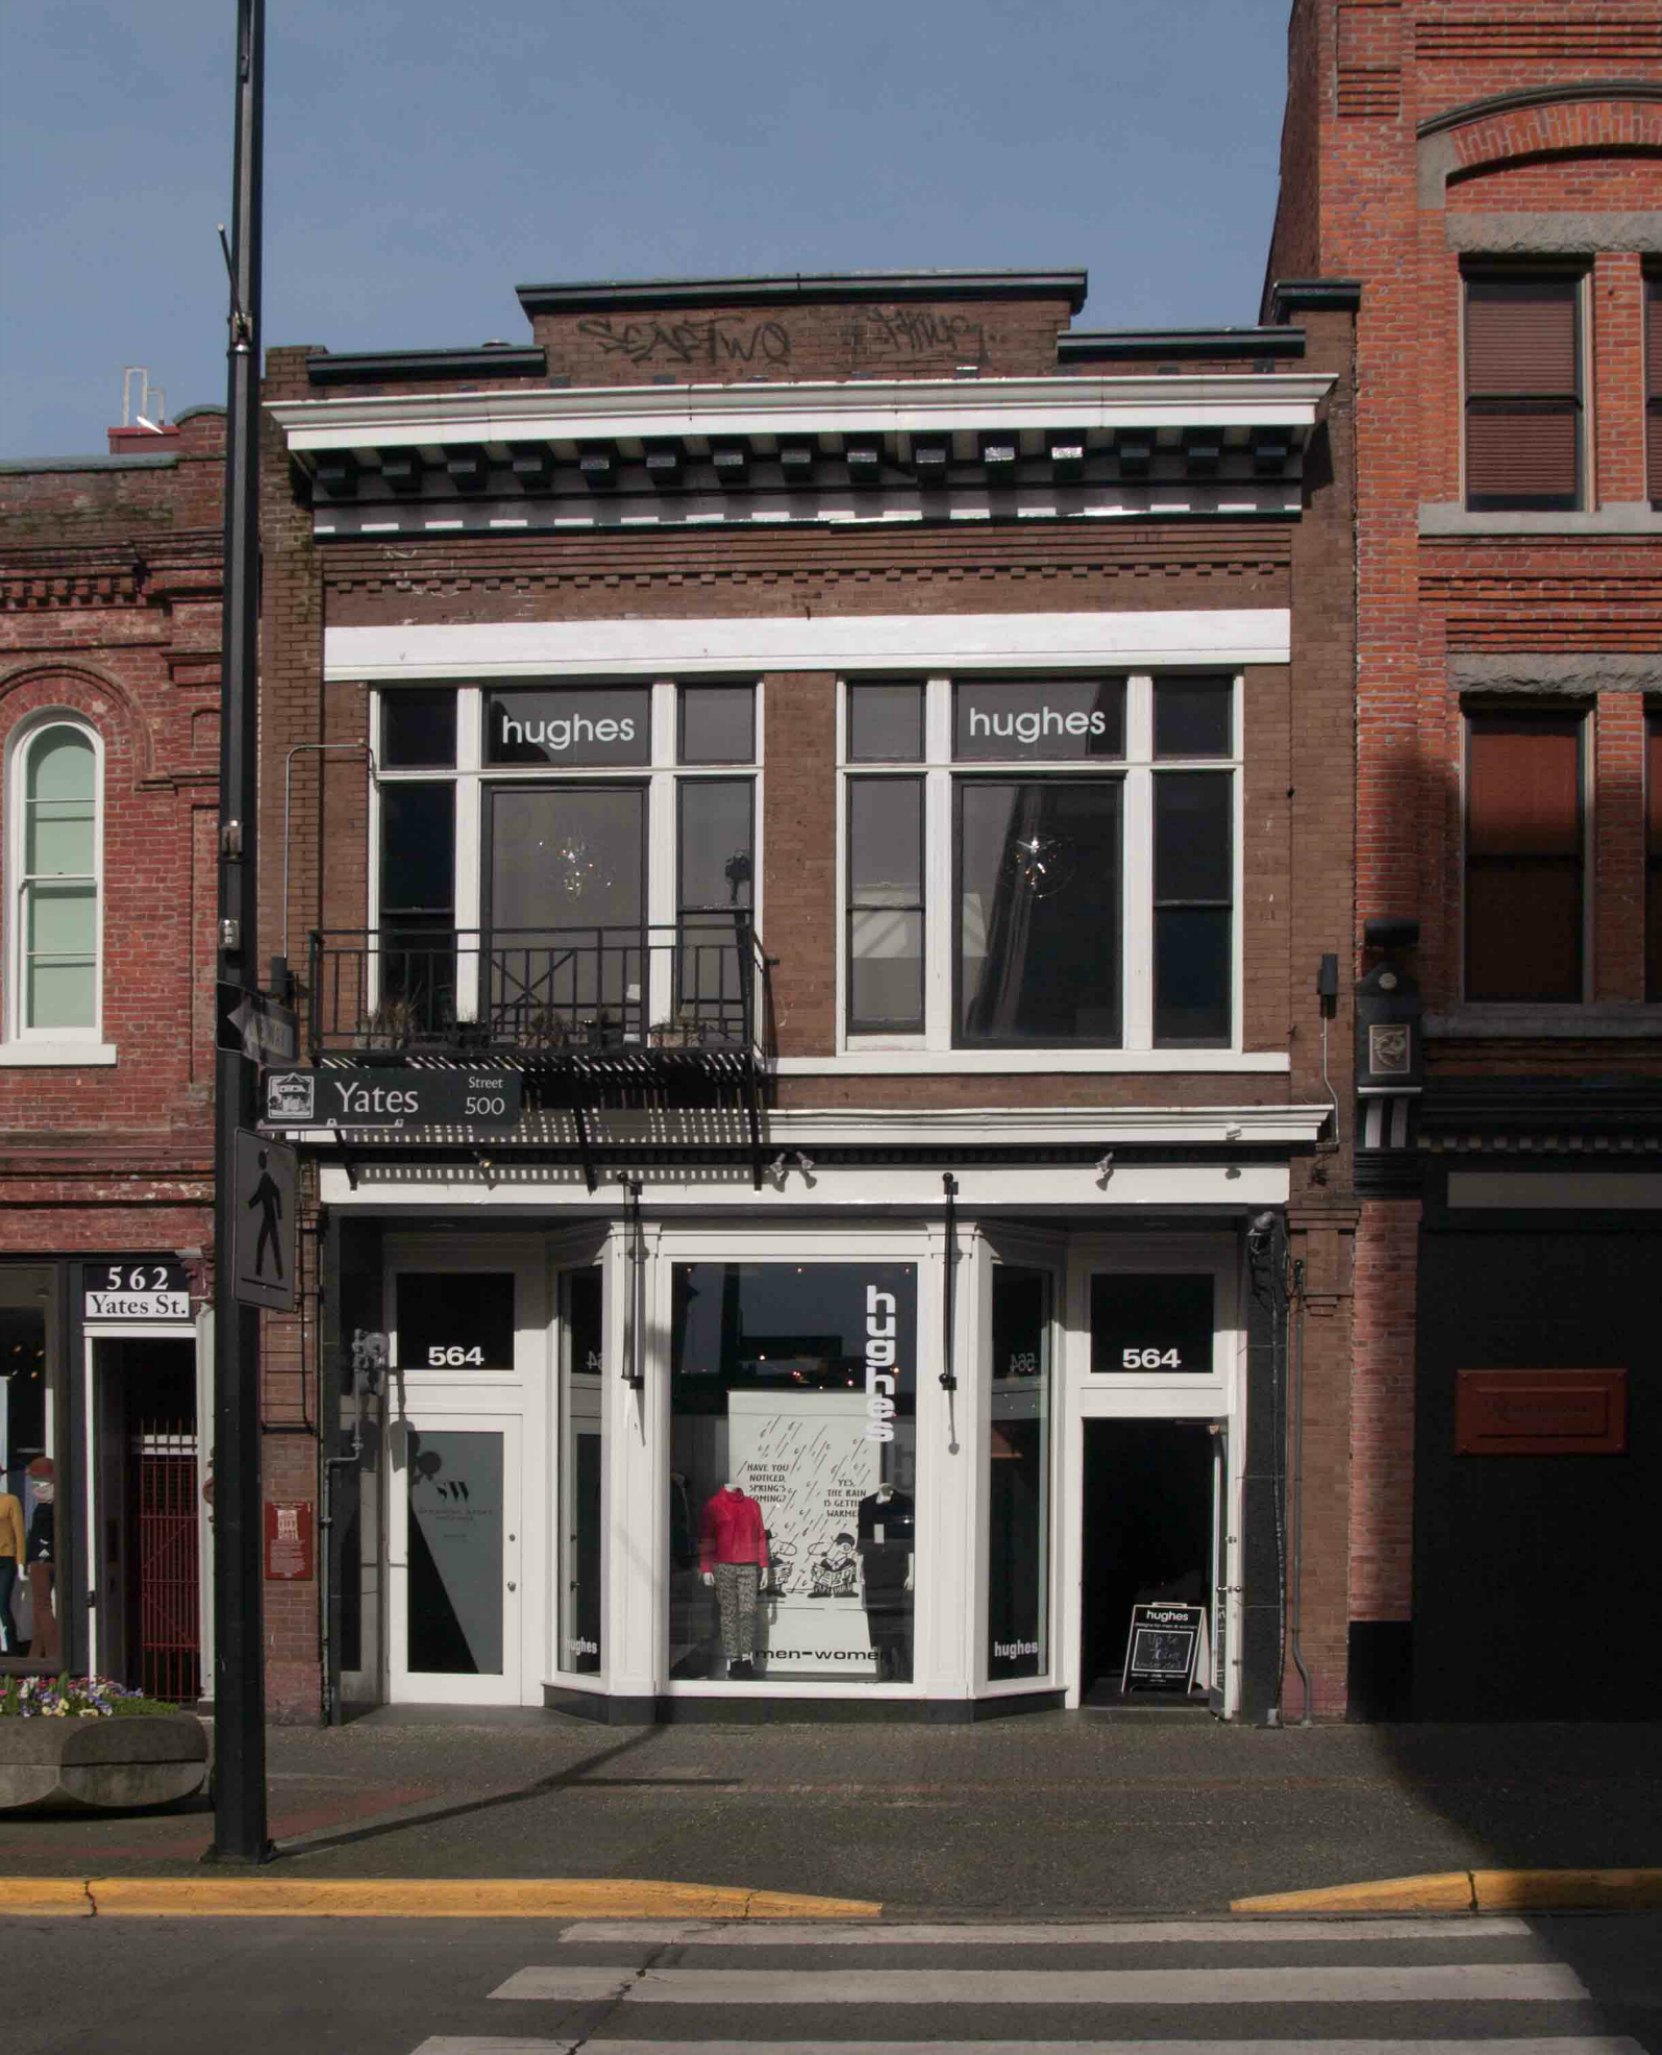 564 Yates Street, originally built circa 1861 for Nathiel Moore's Dry Goods store. It's now Hughes Clothing.